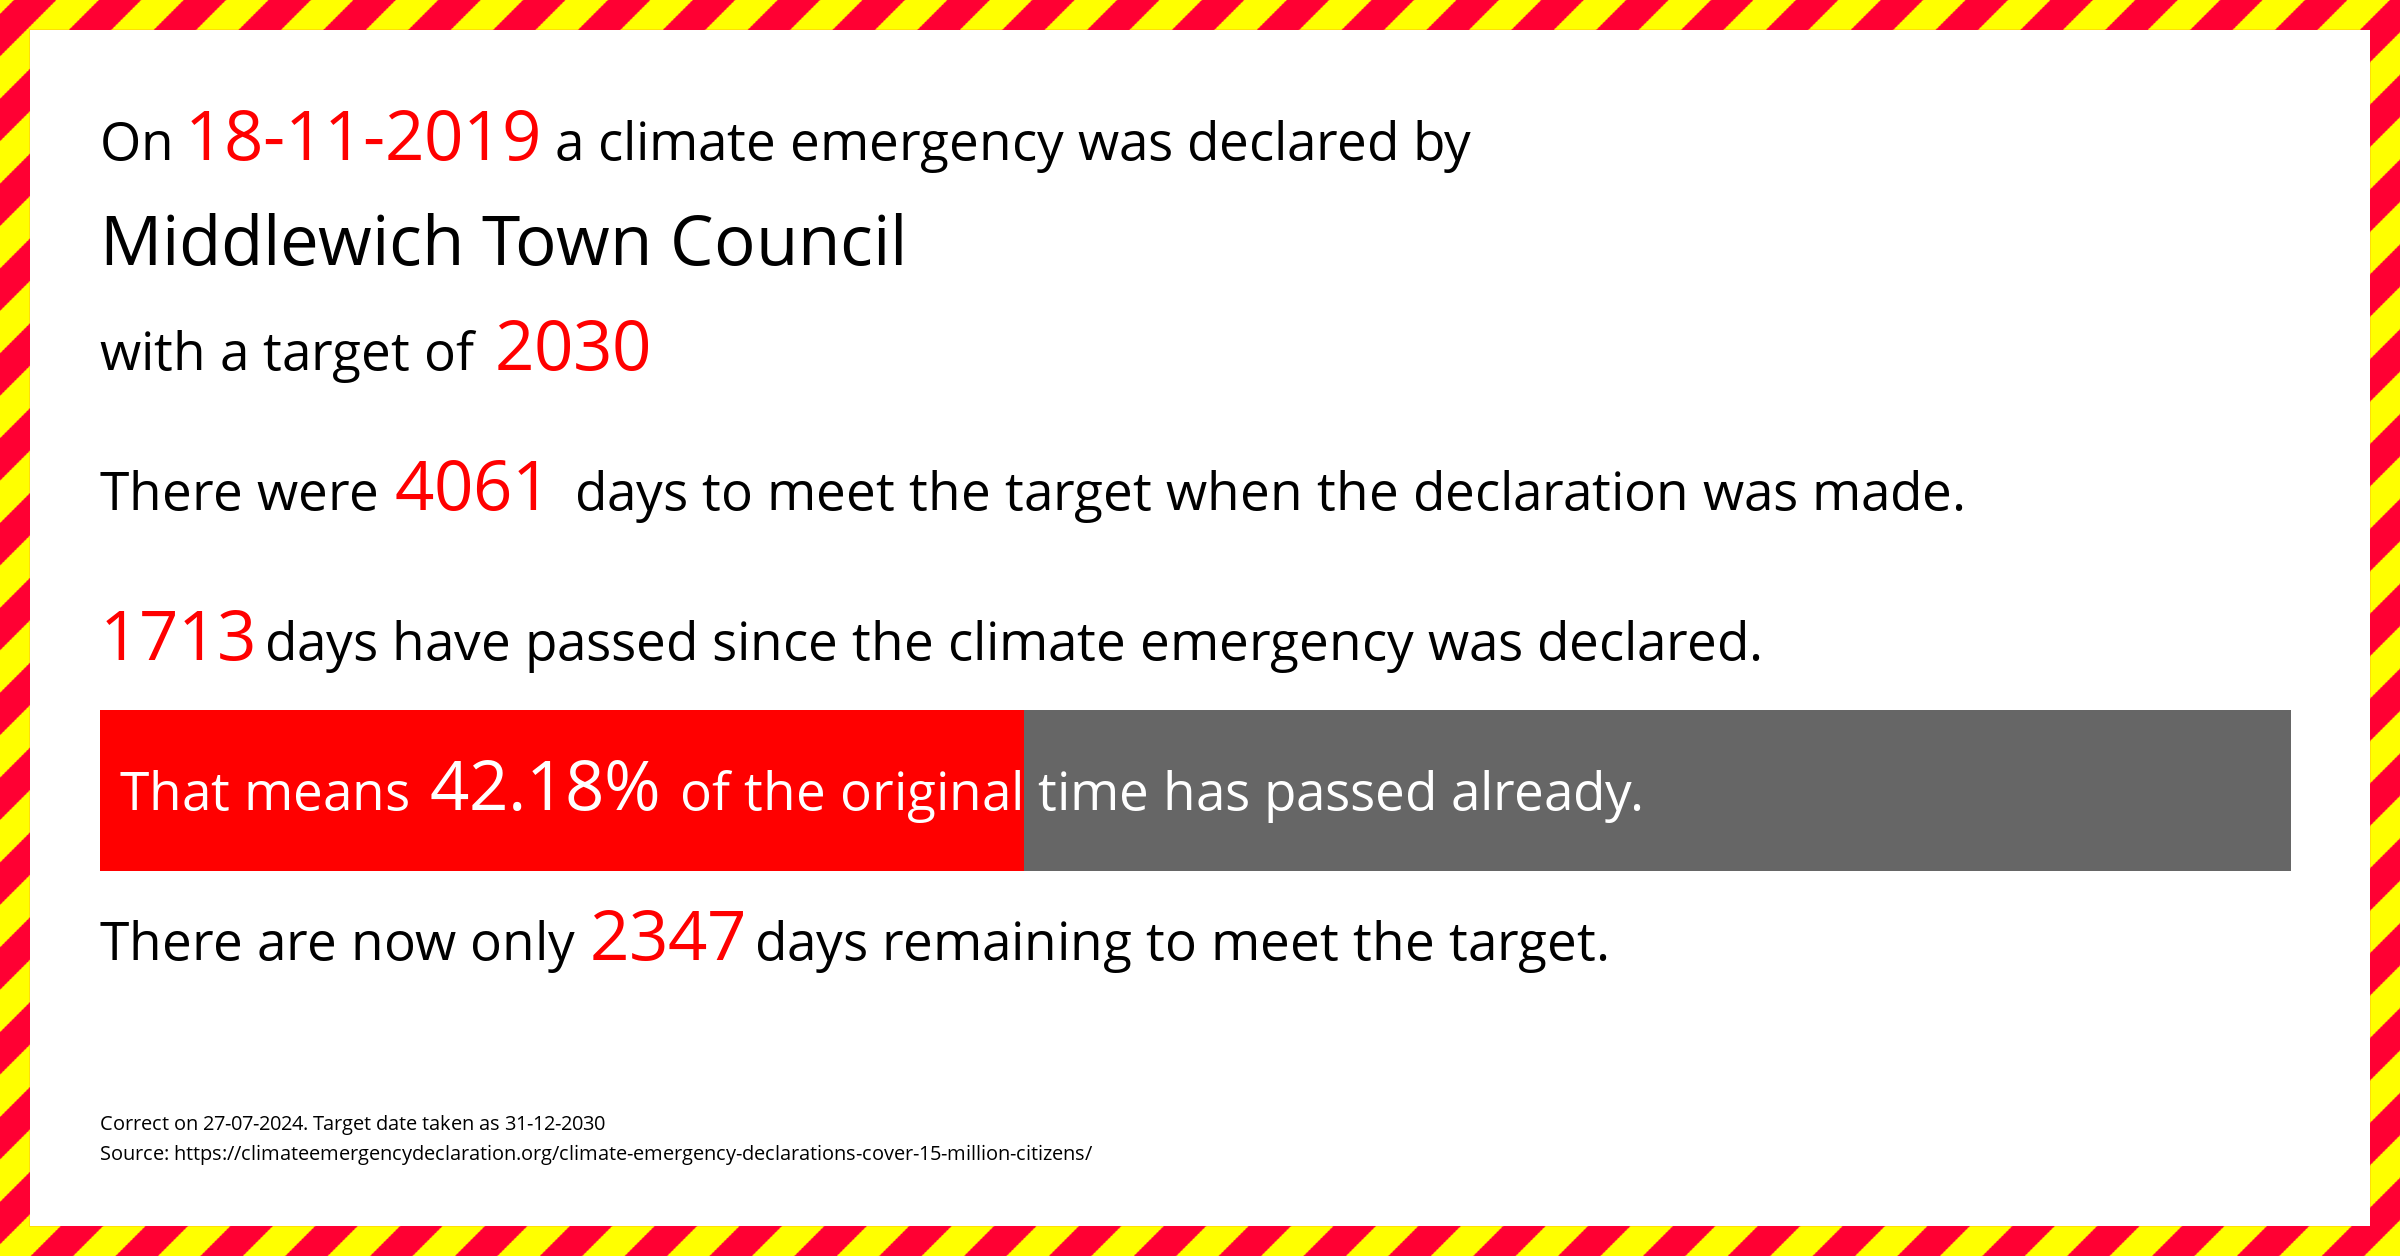 Middlewich Town Council declared a Climate emergency on Monday 18th November 2019, with a target of 2030.